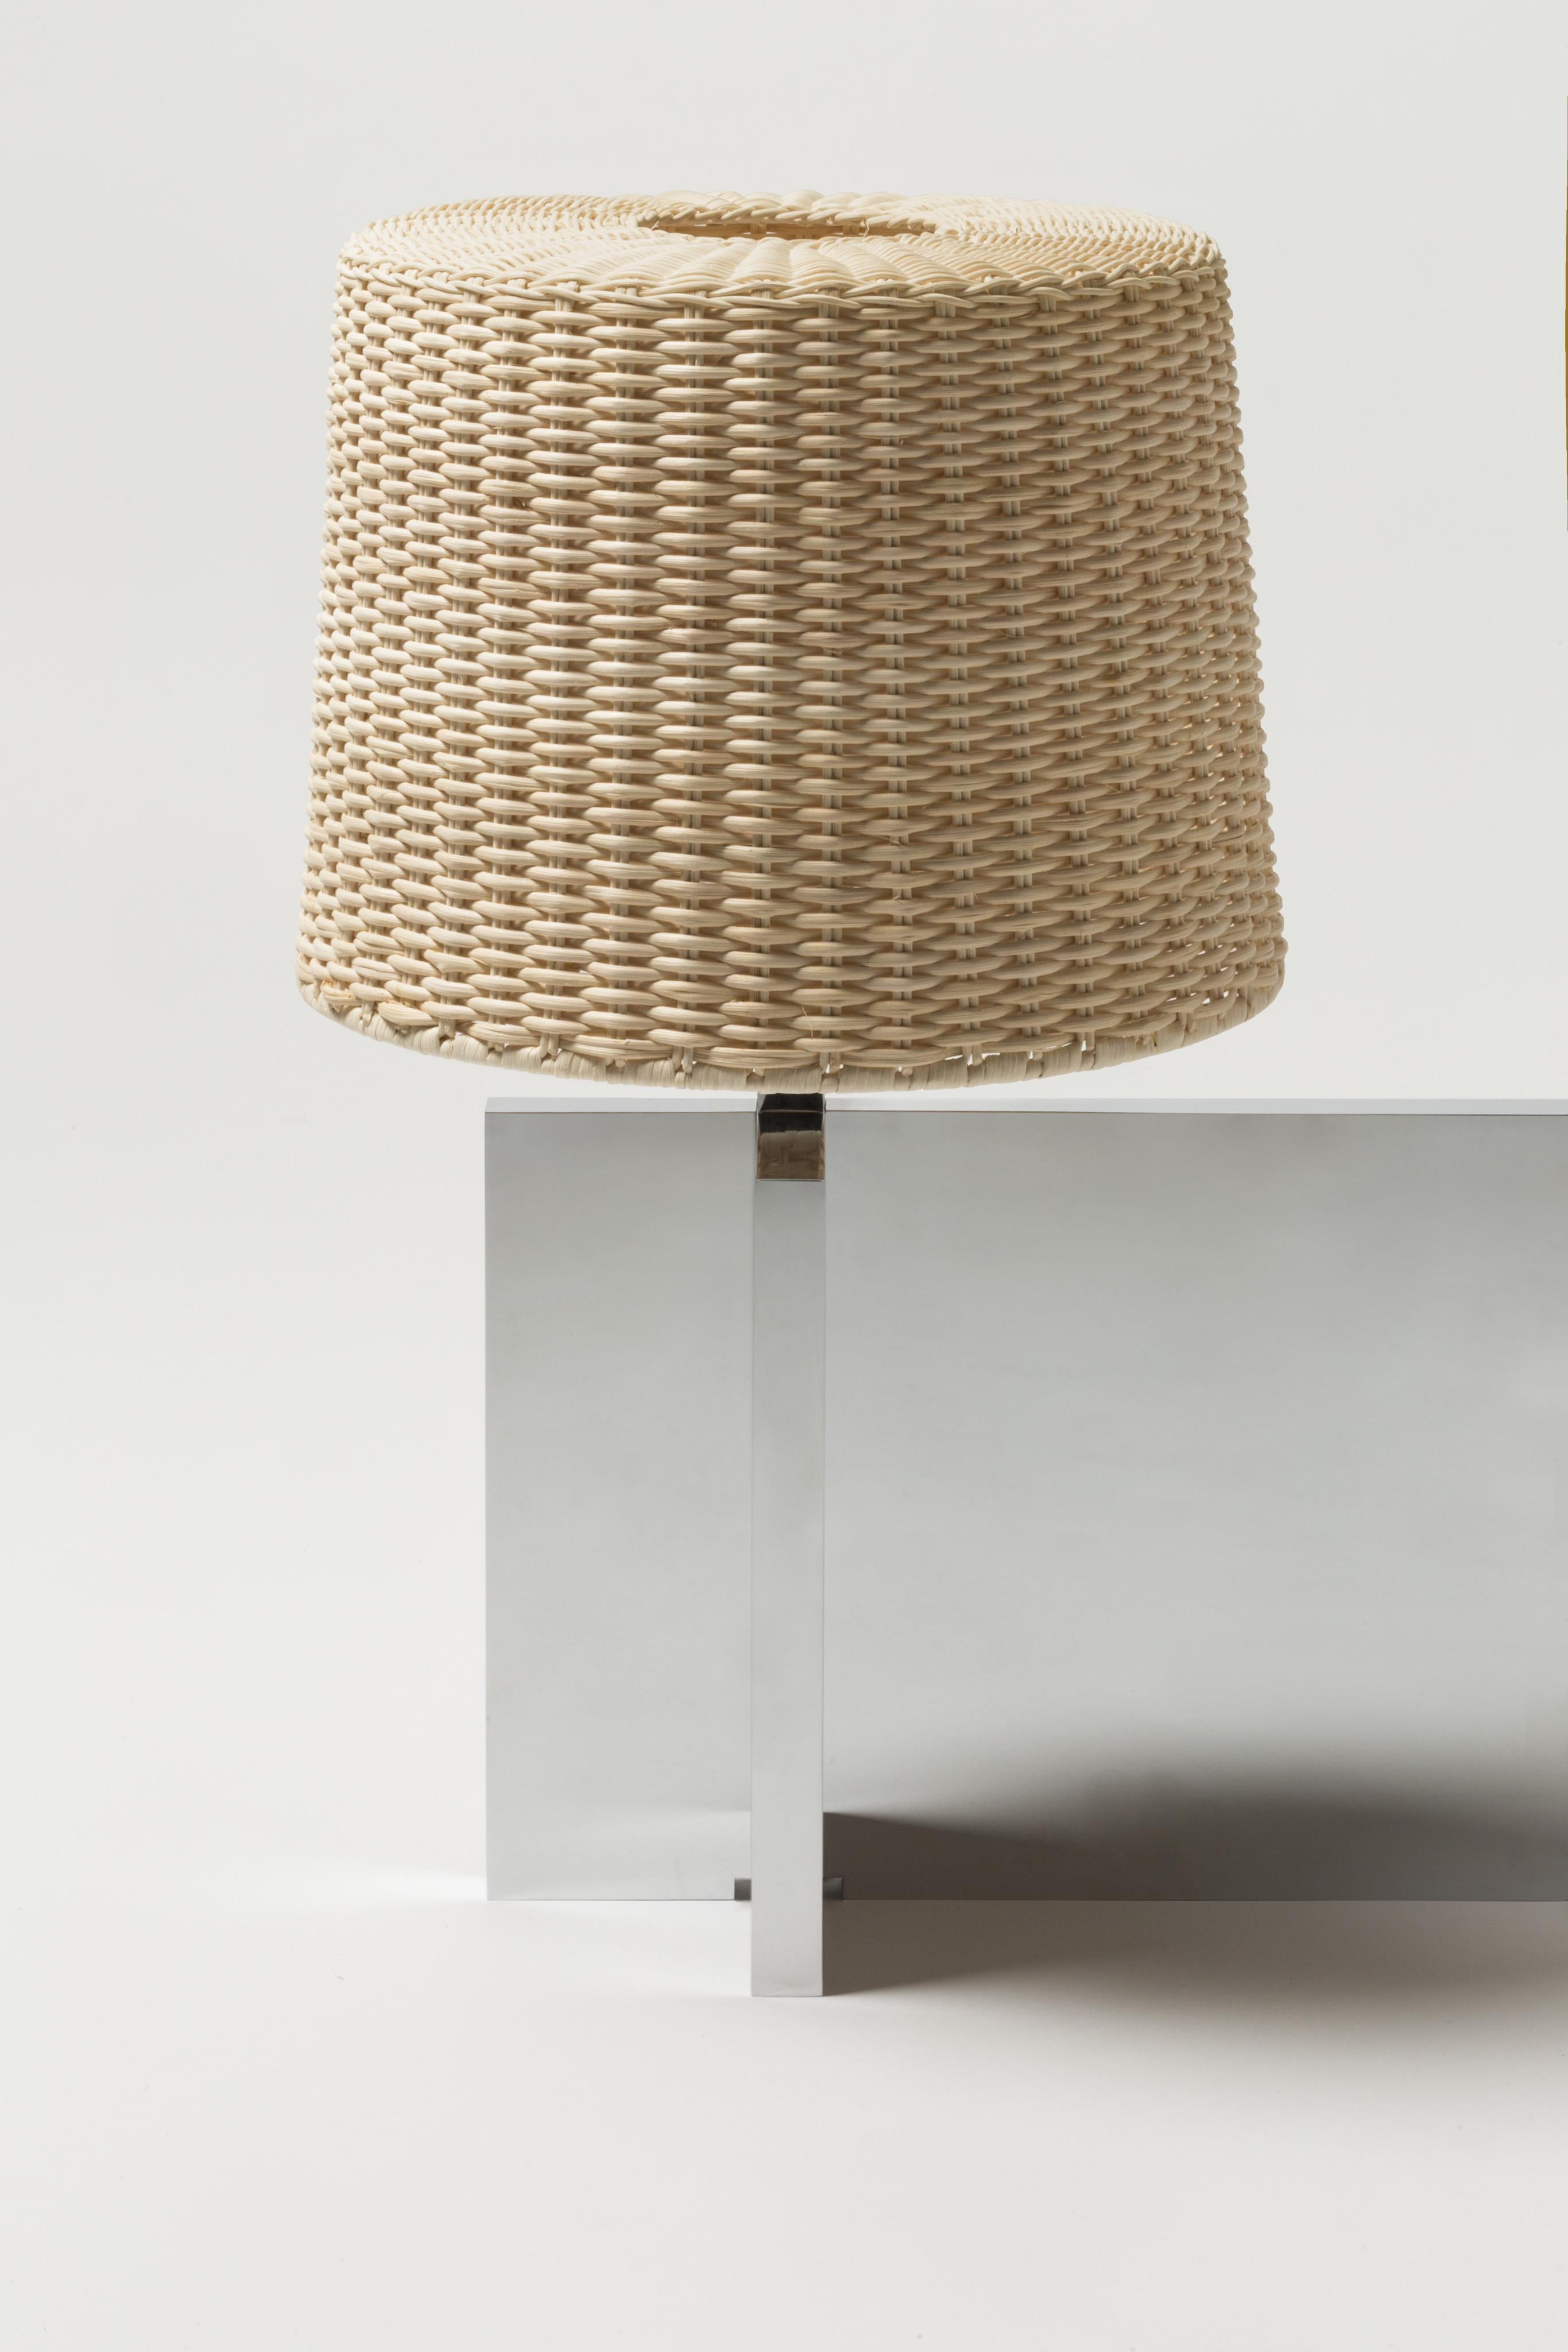 Lipari Table Lamp (Medium) -- Stephane Parmentier x Giobagnara

Metal finishing has to be indicated; chrome/brass/bronze available. Shade is available only in natural rattan.

Embracing sleek designs and beautiful materials, the Stephane Parmentier